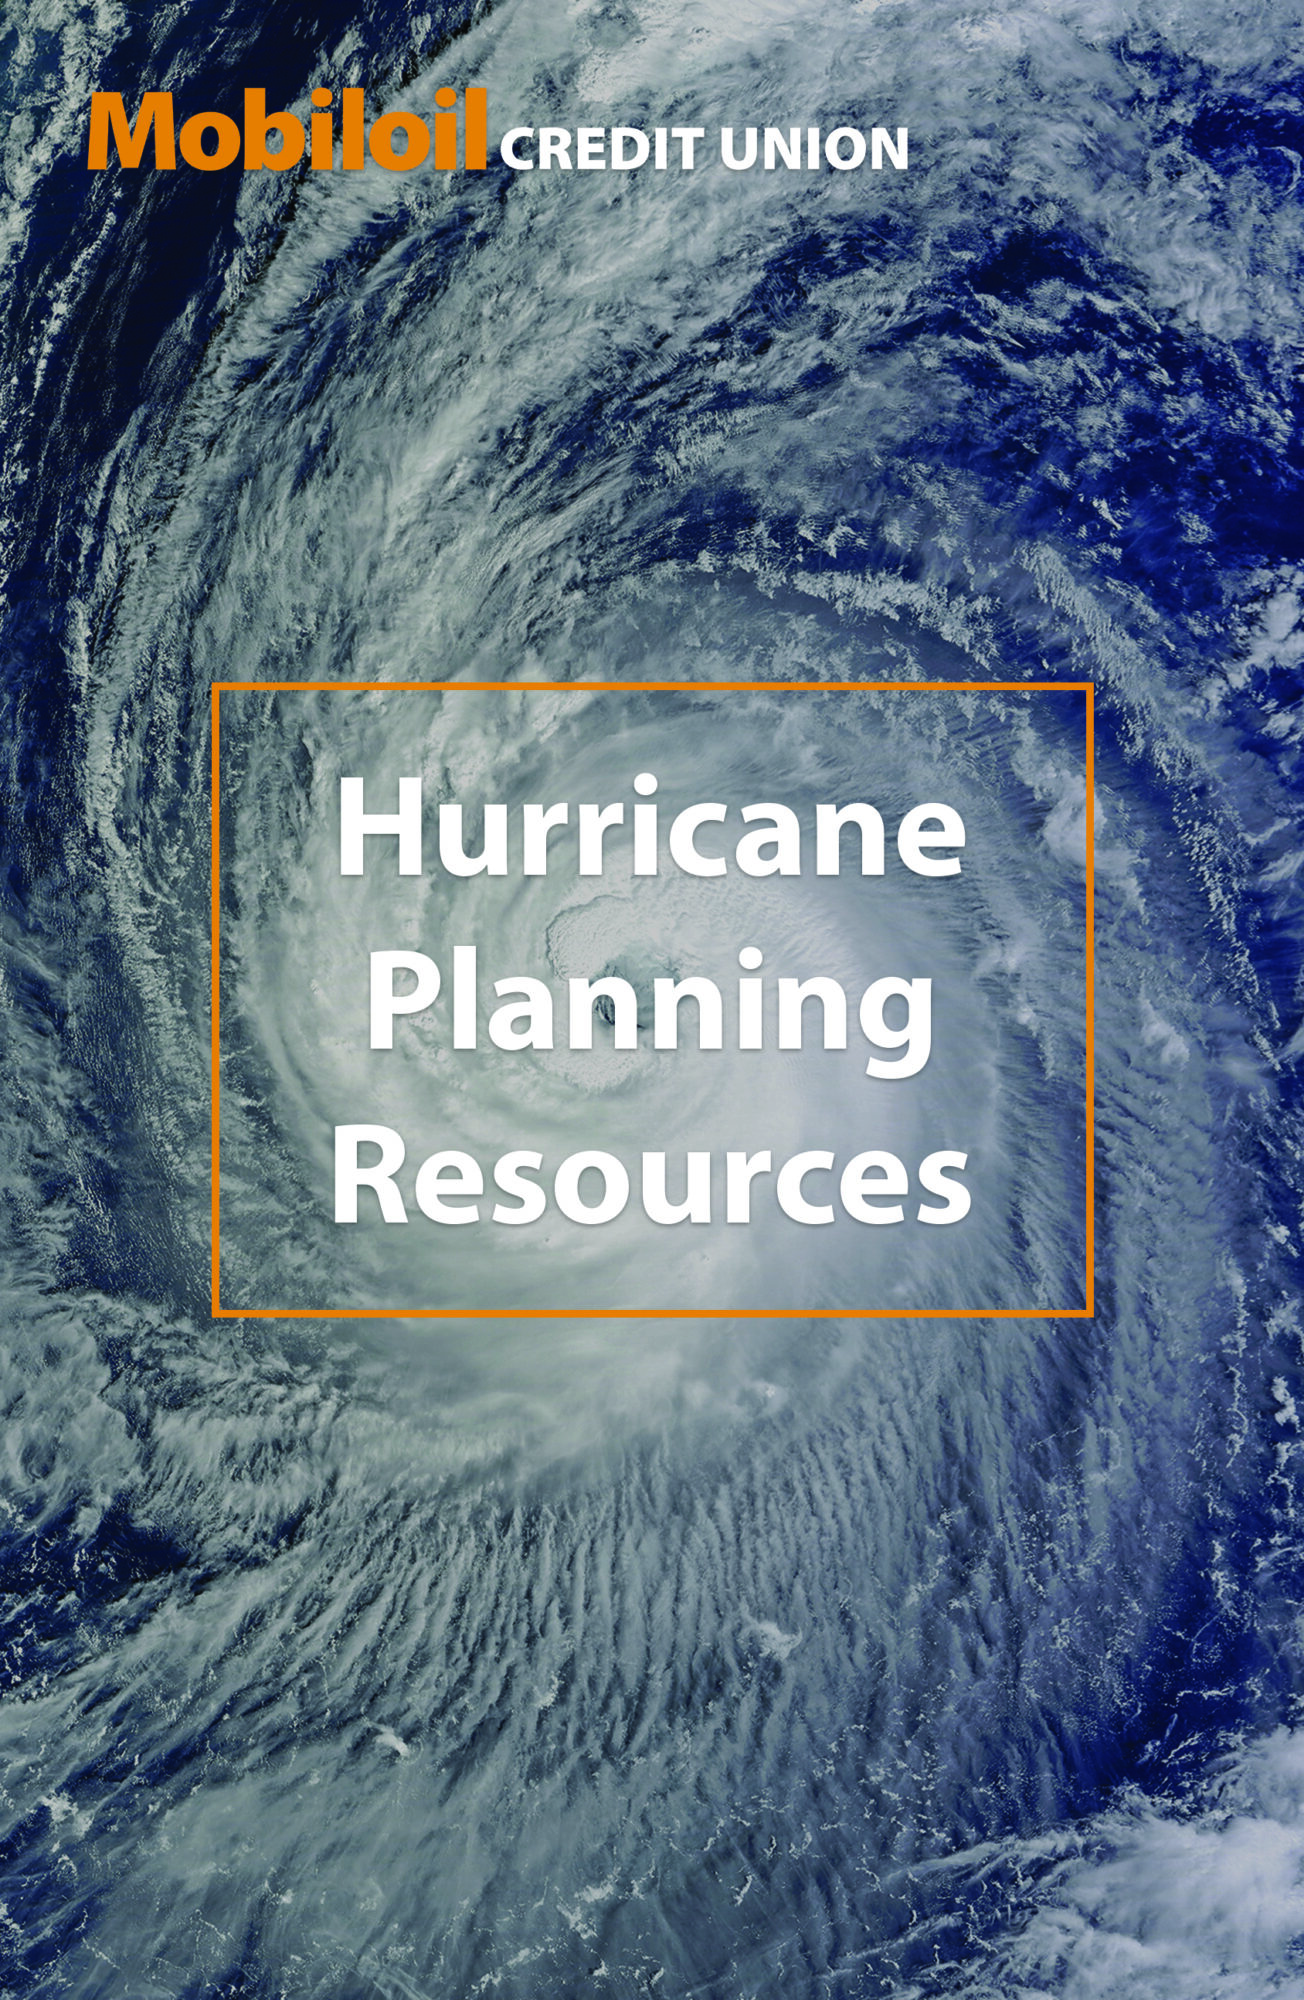 Hurricane Planning Resources cover photo - image of an active hurricane